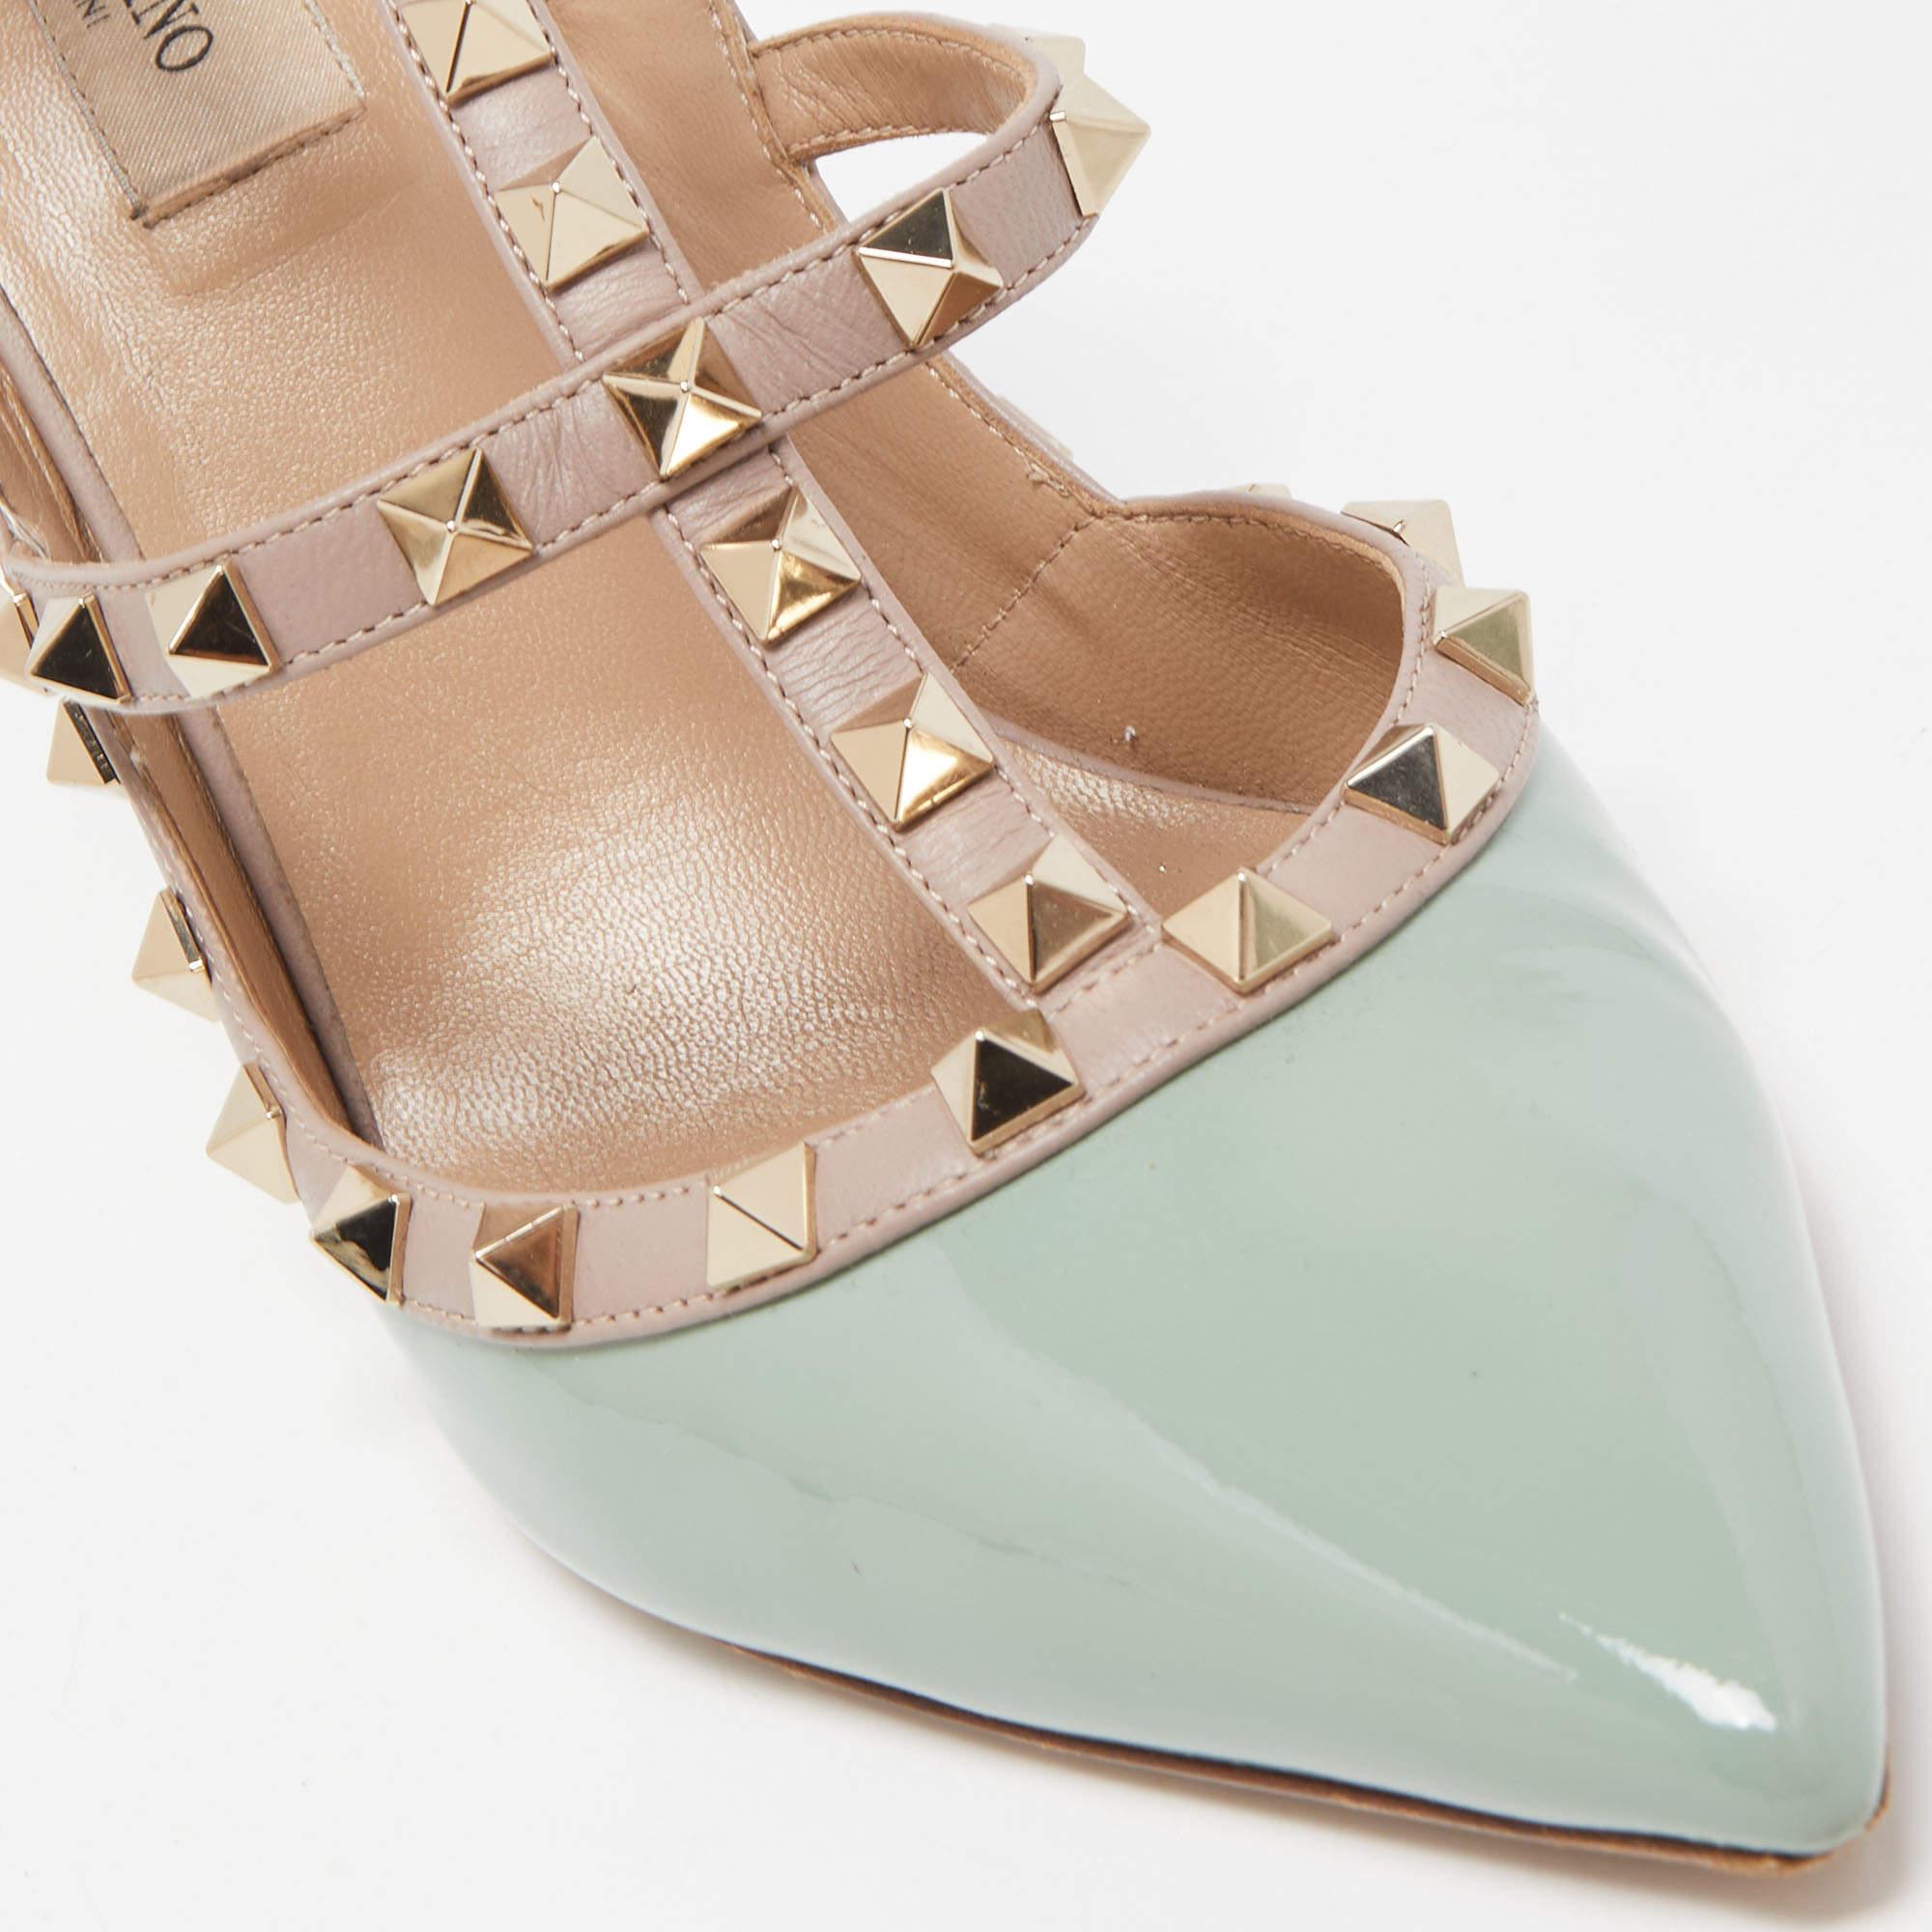 Valentino Green/Beige Patent and Leather Rockstud Pumps Size 40.5 3